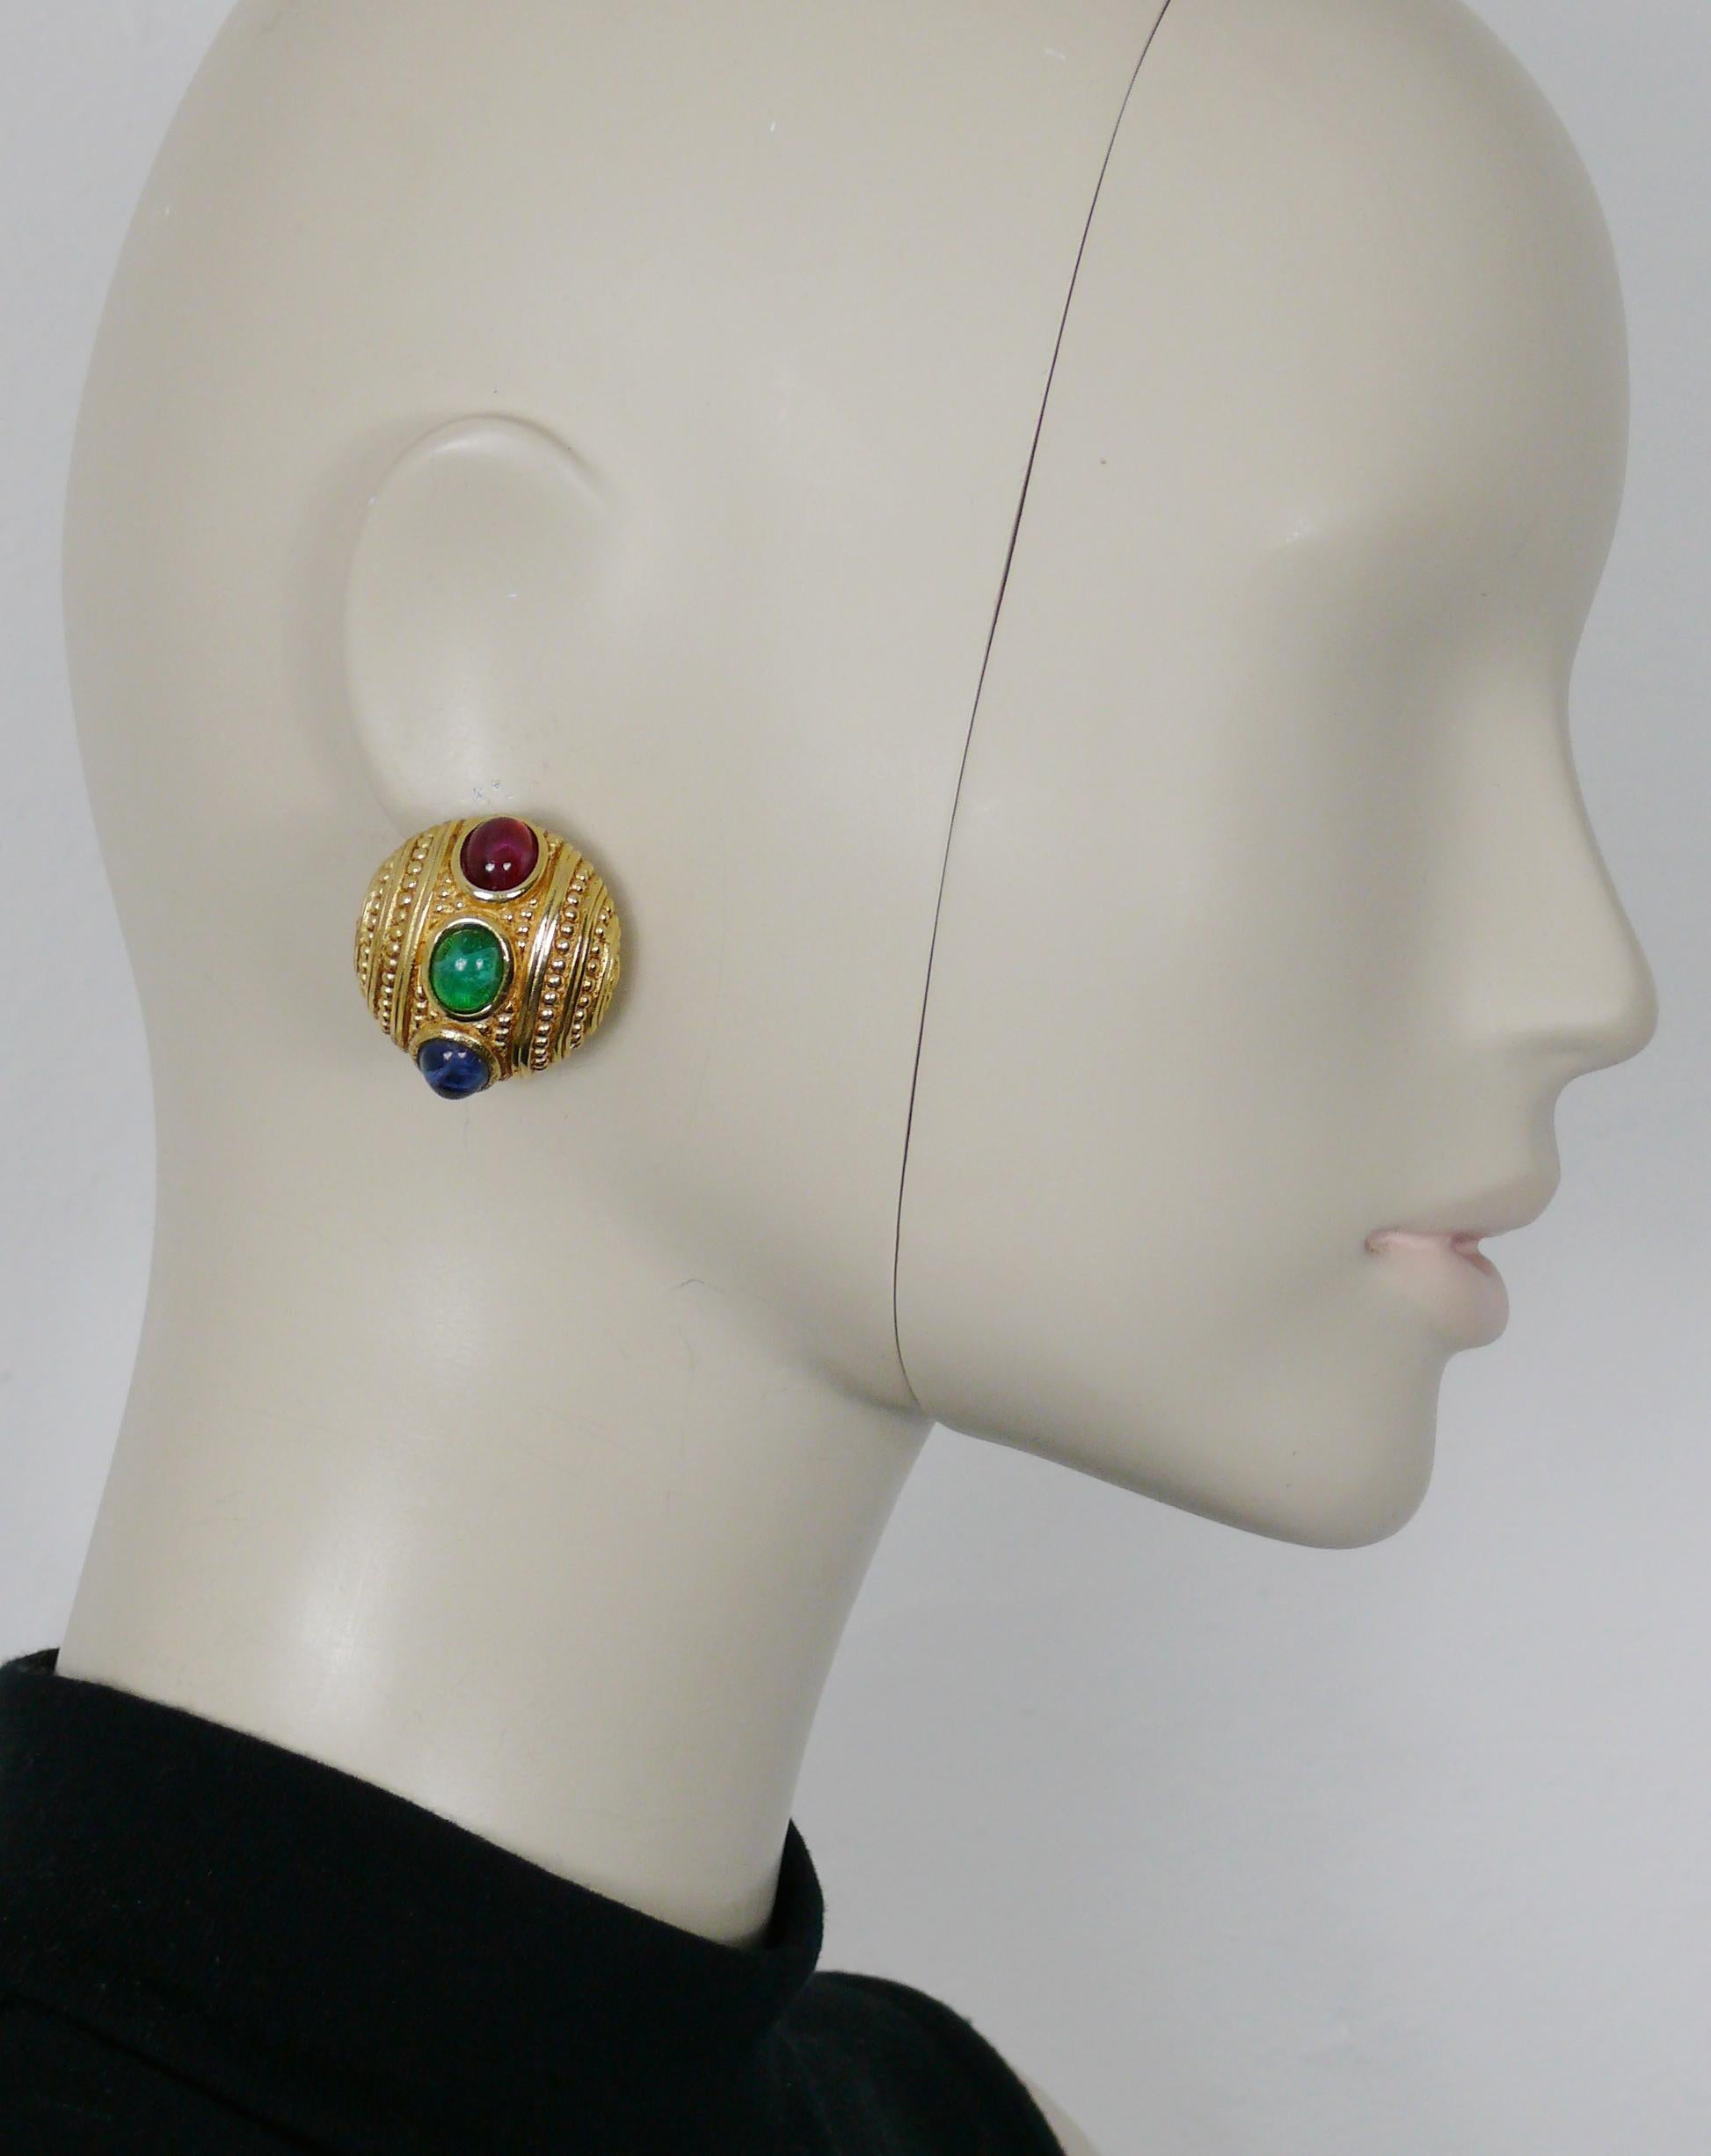 CHRISTIAN DIOR vintage gold toned dome-shaped clip-on earrings embelisshed with three marbled multicolour glass cabochons (red, green and blue).

Embossed CHR. DIOR © GERMANY.

Indicative measurements : diameter approx. 2.9 cm (1.14 inches).

Weight